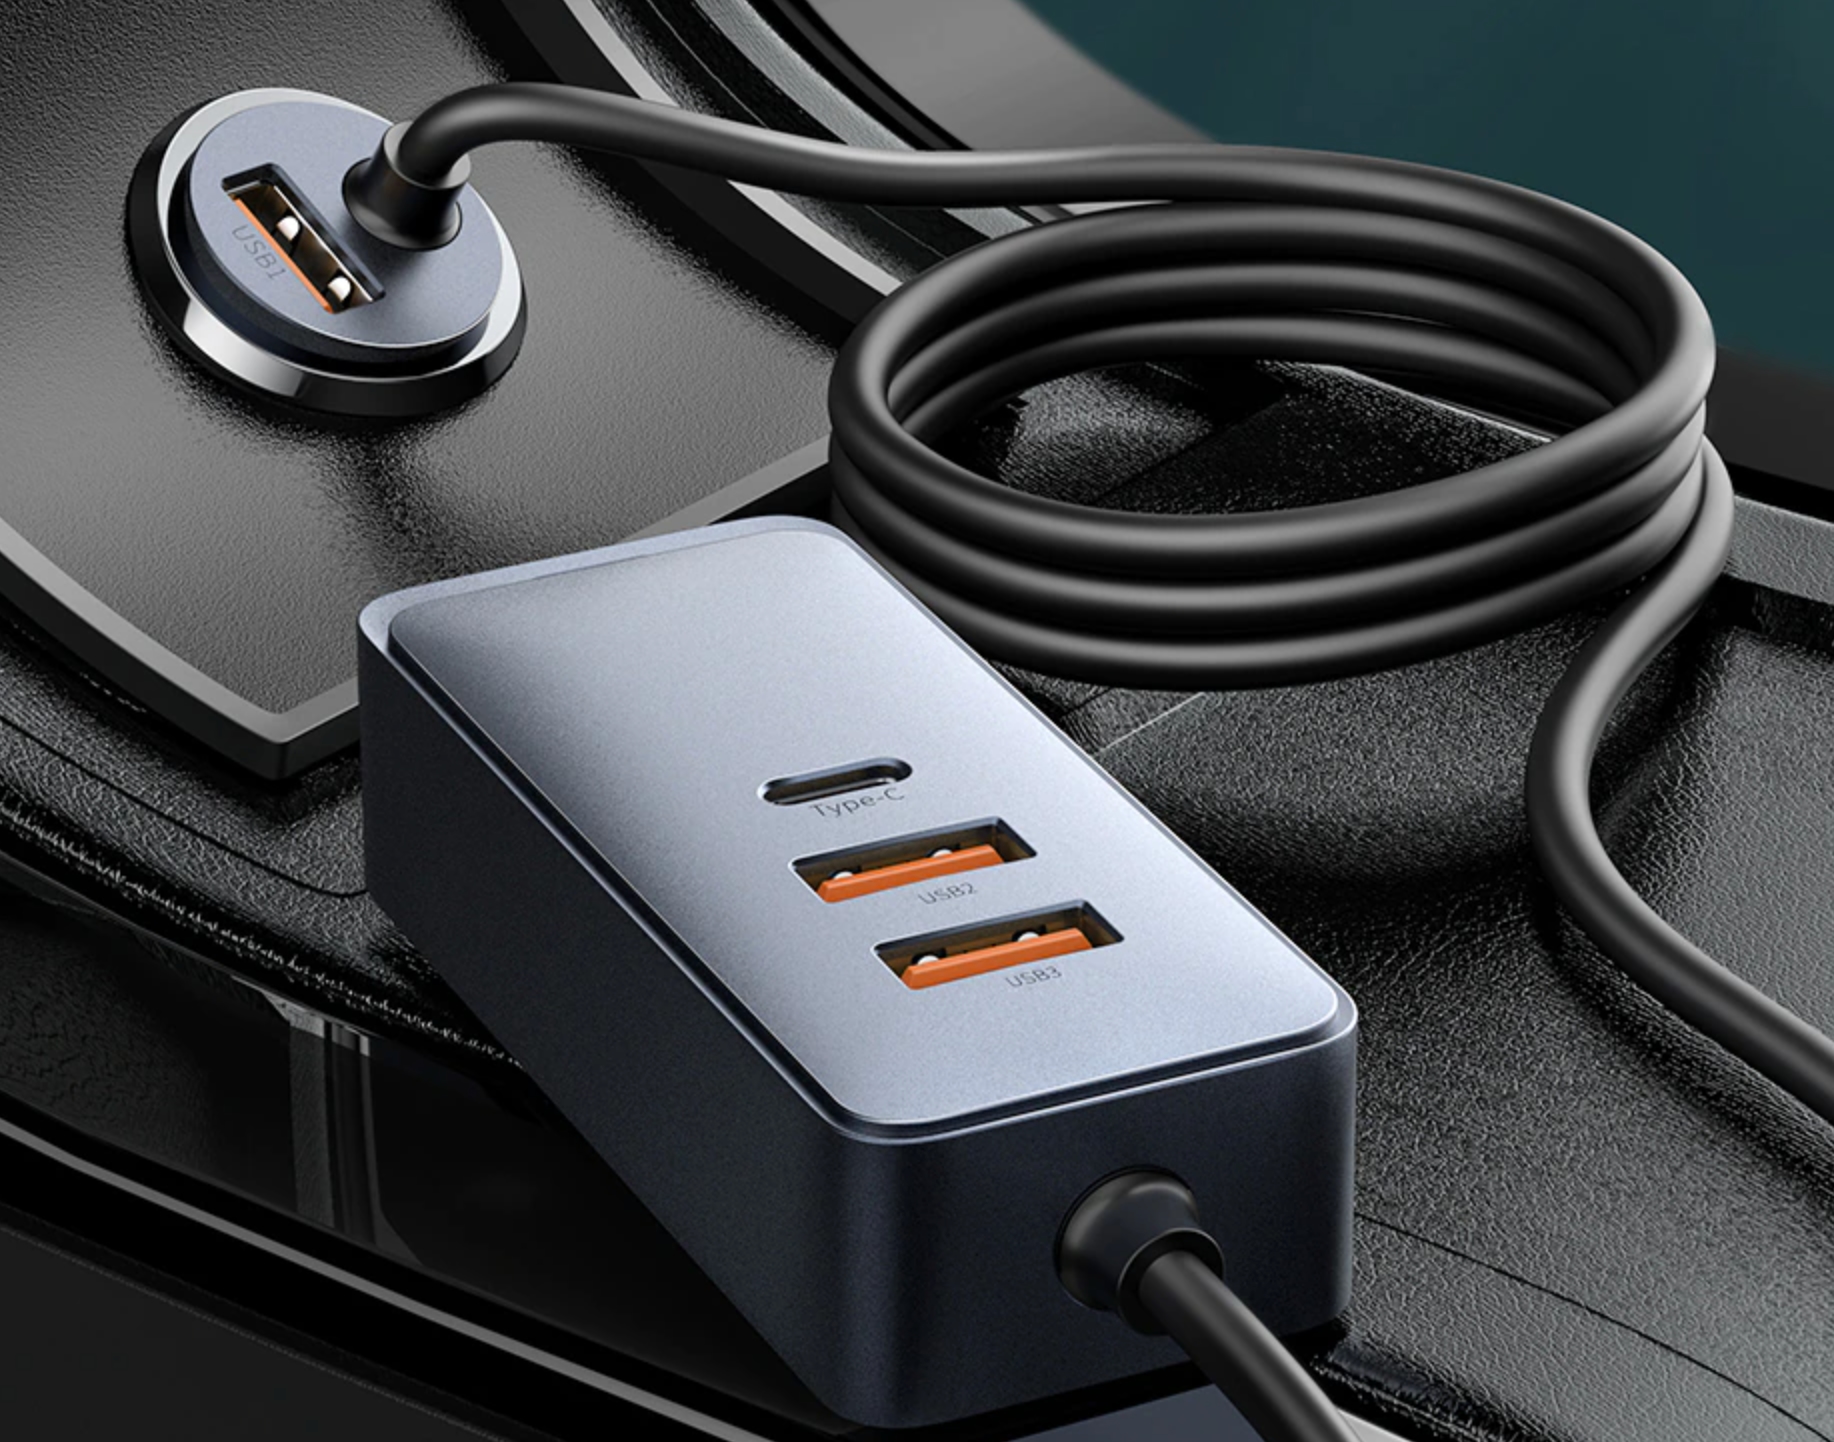 Baseus car charger with extender, 4 ports and 120W power for $20